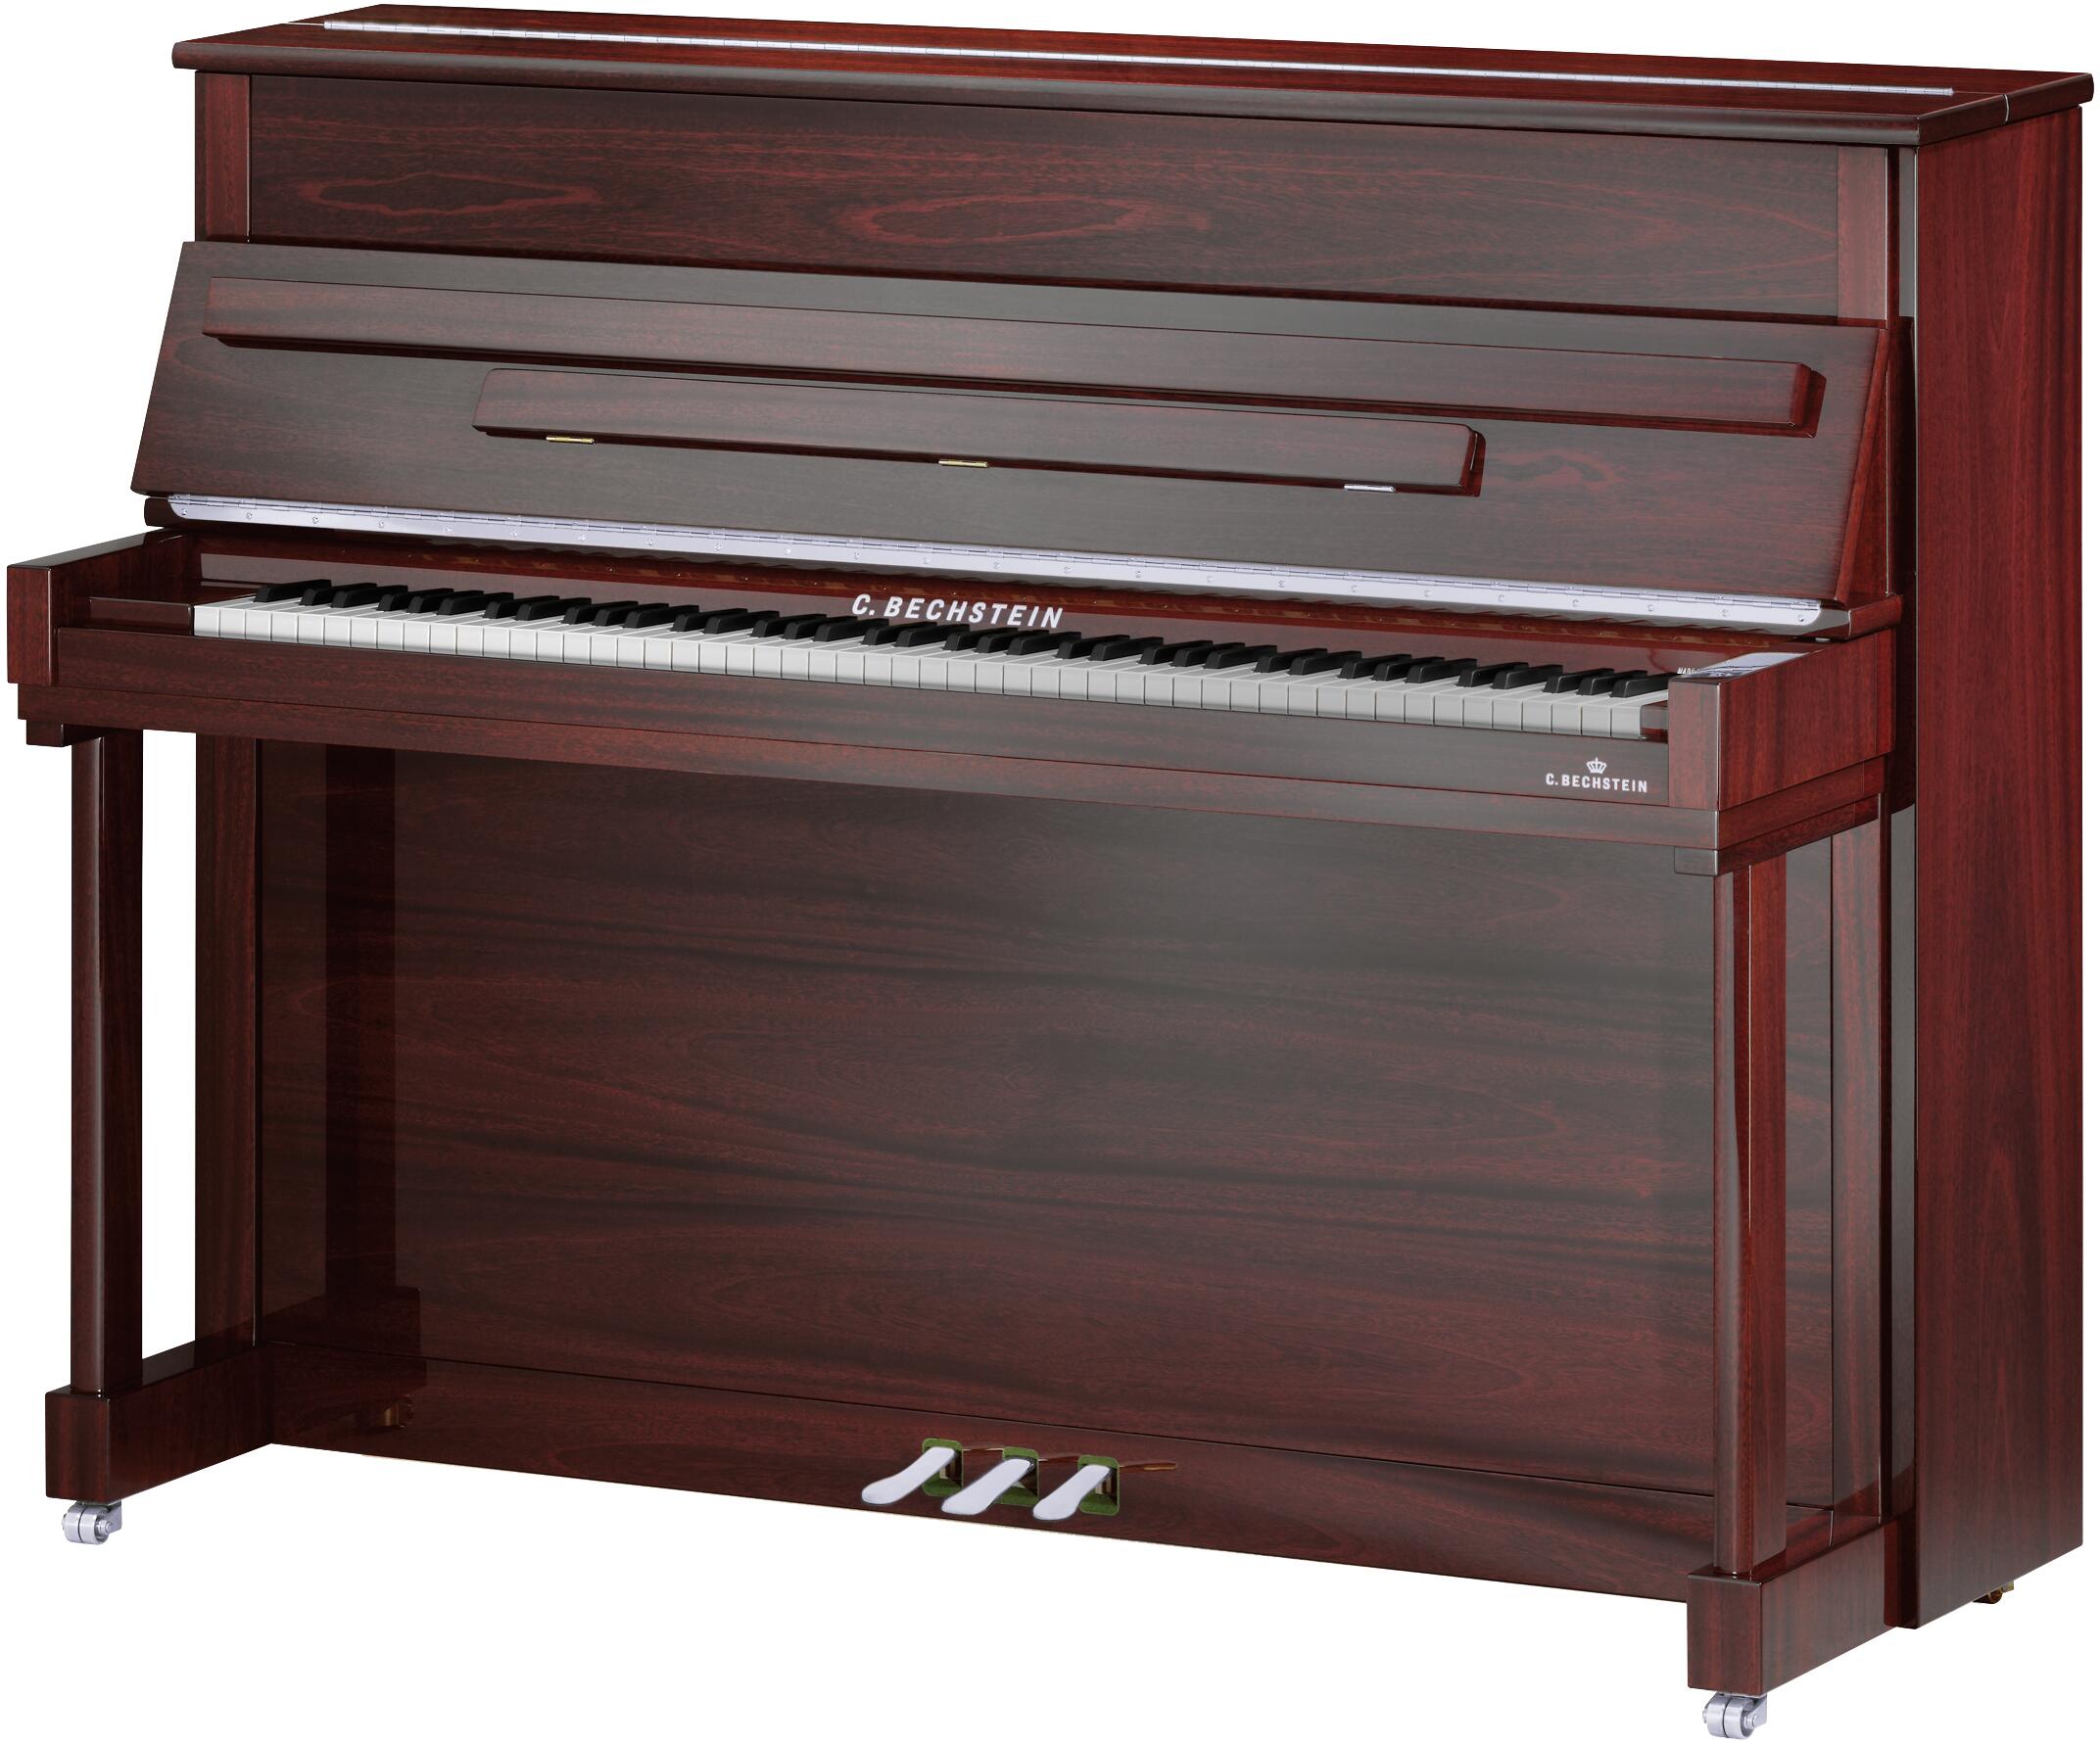 Bechstein Residence R4 Classic 120cm Polished-polished Mahogany Chrome + C.Bechstein Vario silencer system : photo 1